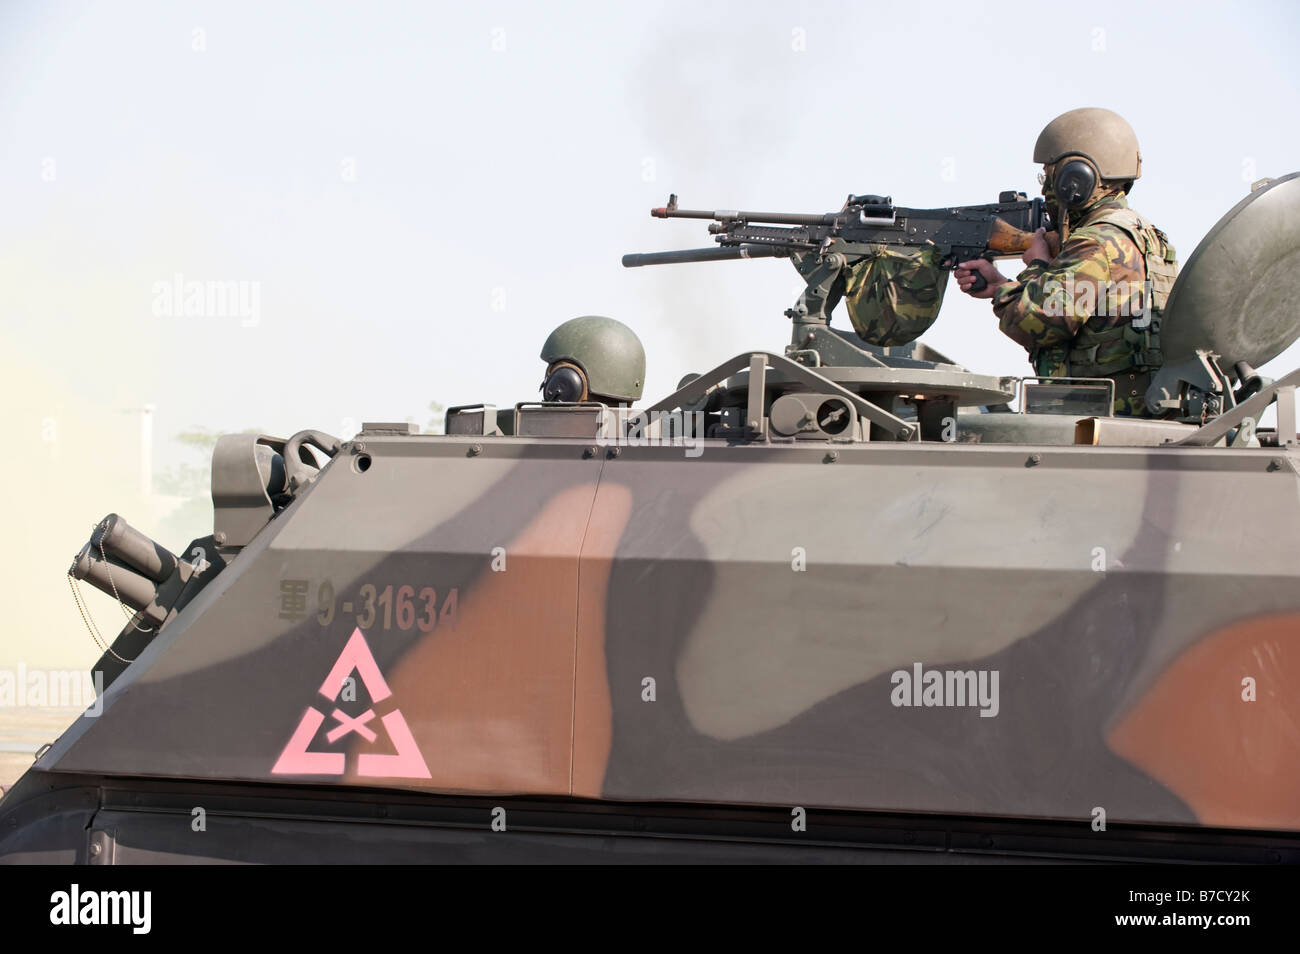 Close up Of A Taiwanese Soldier Firing A Machine Gun In A CM22 Armored Carrier, Taiwan Stock Photo